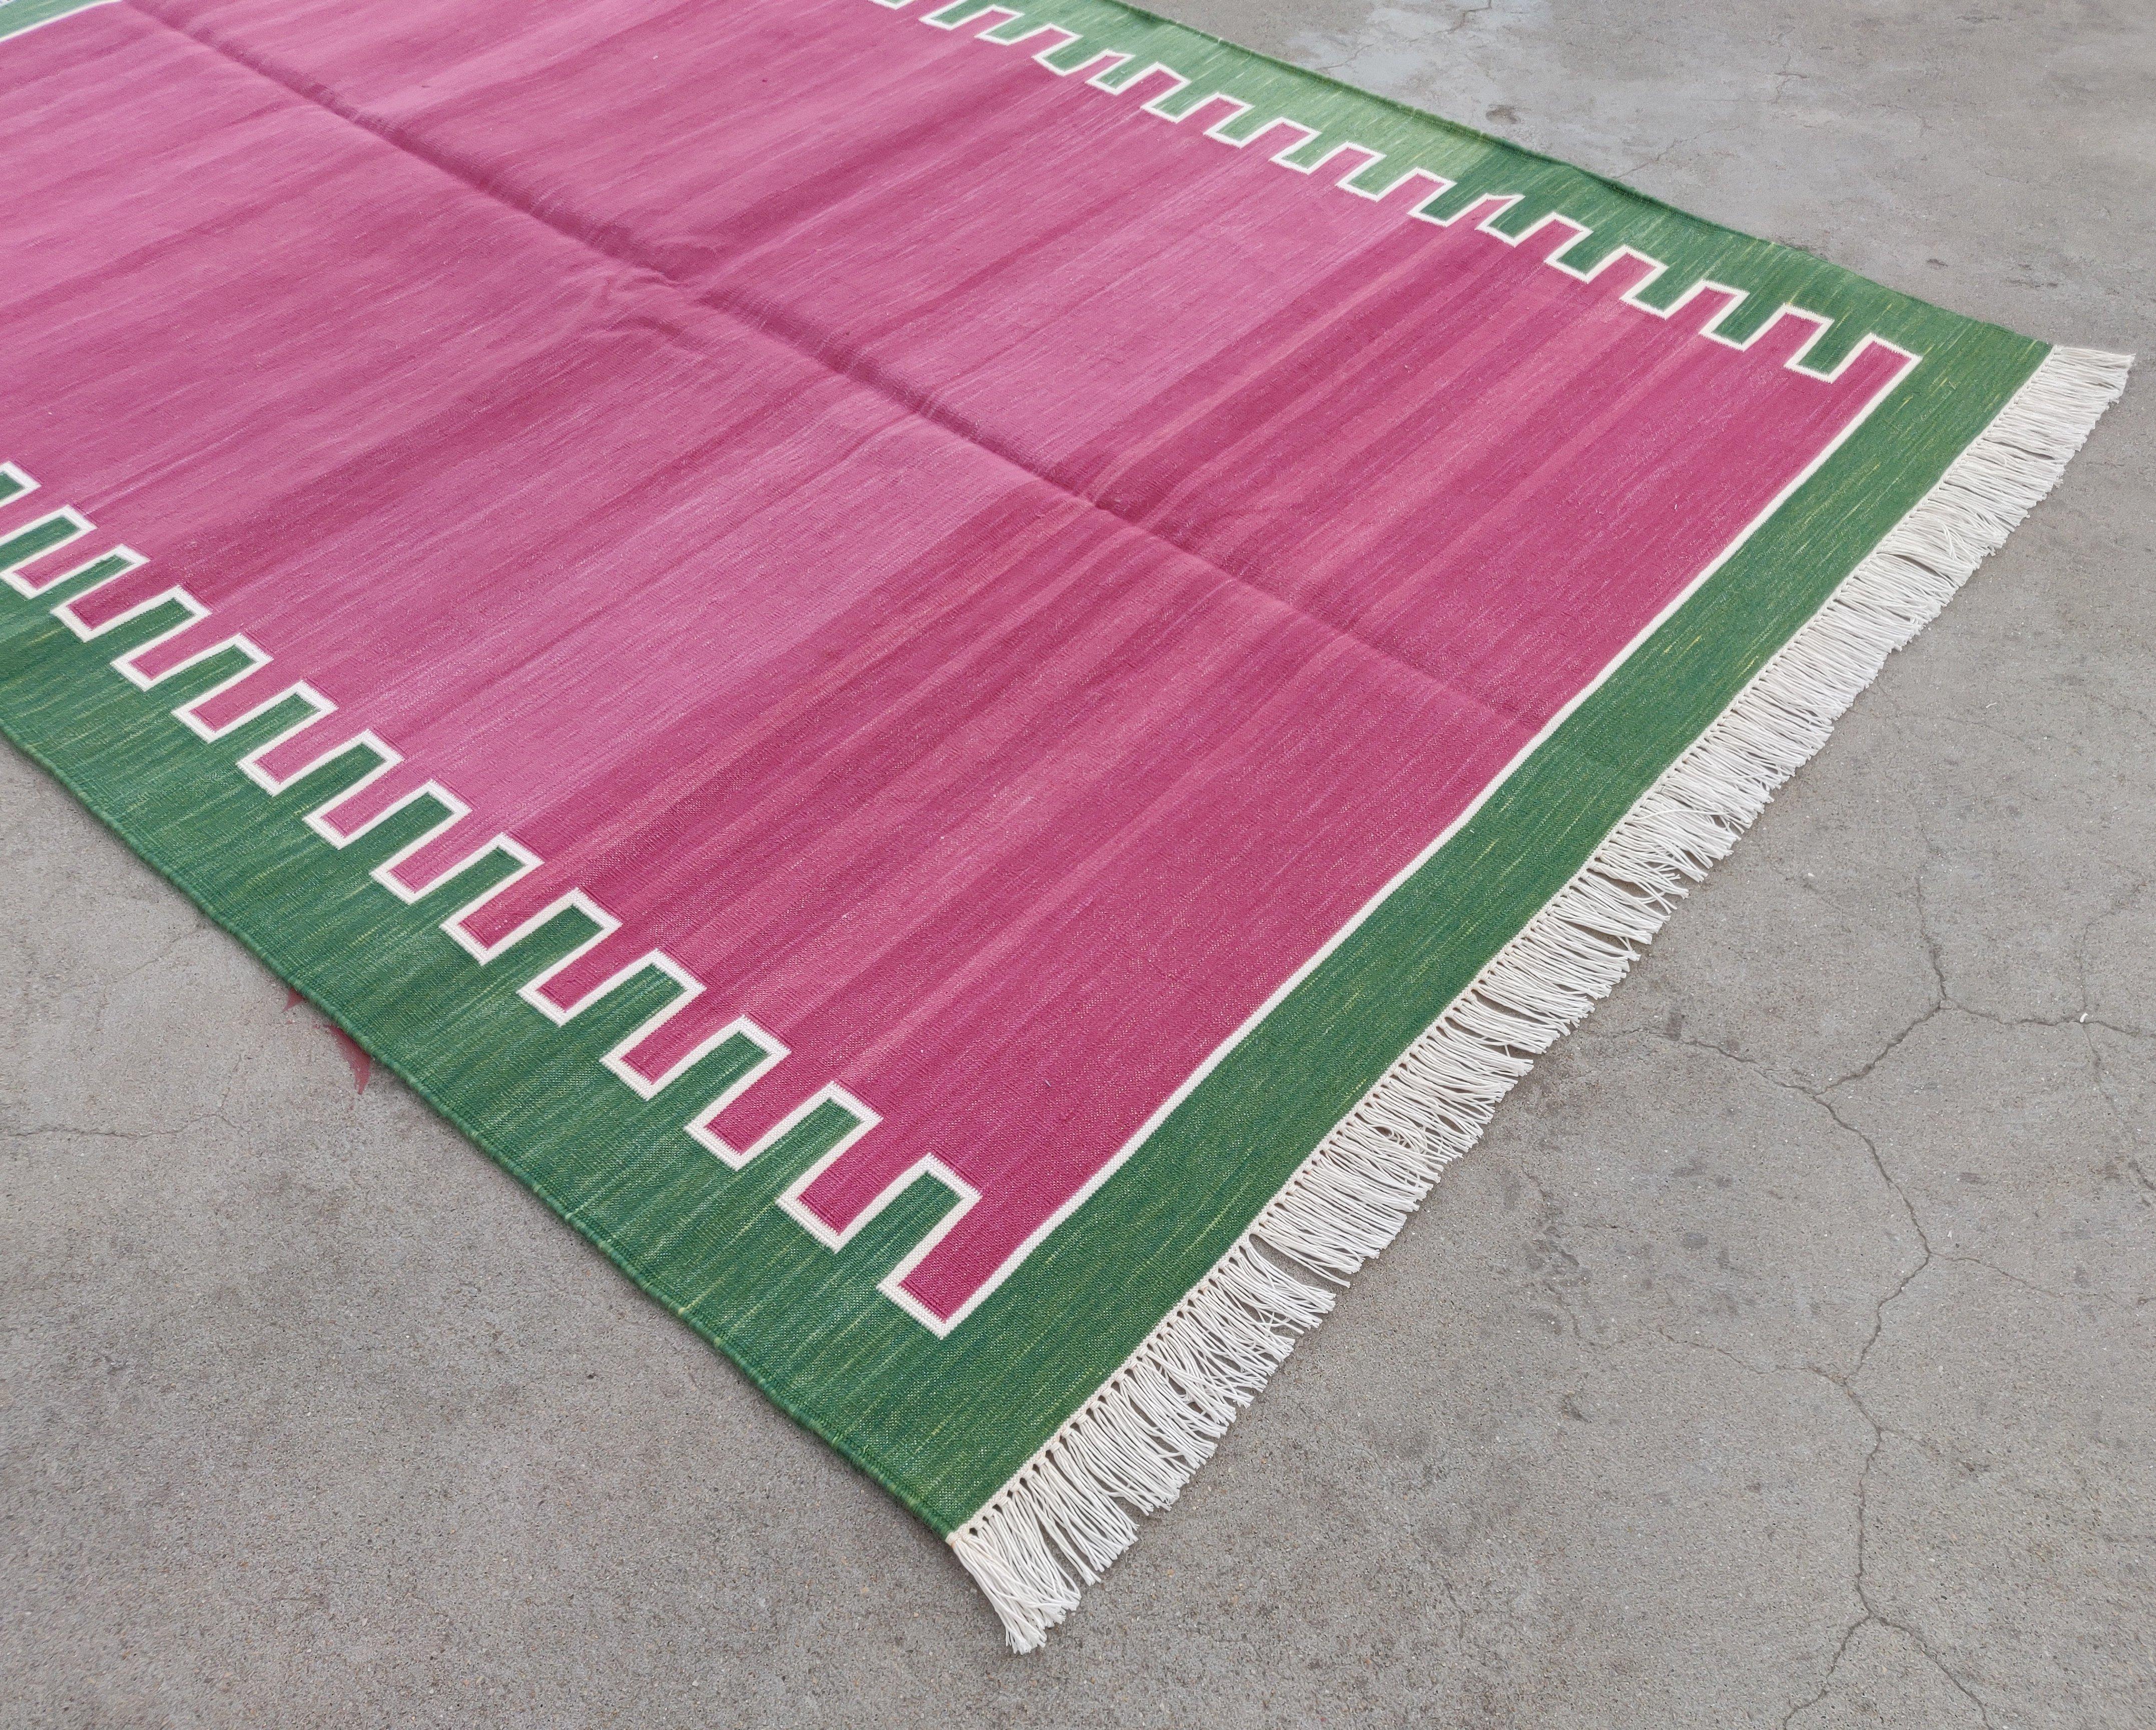 Mid-Century Modern Handmade Cotton Area Flat Weave Rug, 4x6 Pink And Green Striped Indian Dhurrie For Sale